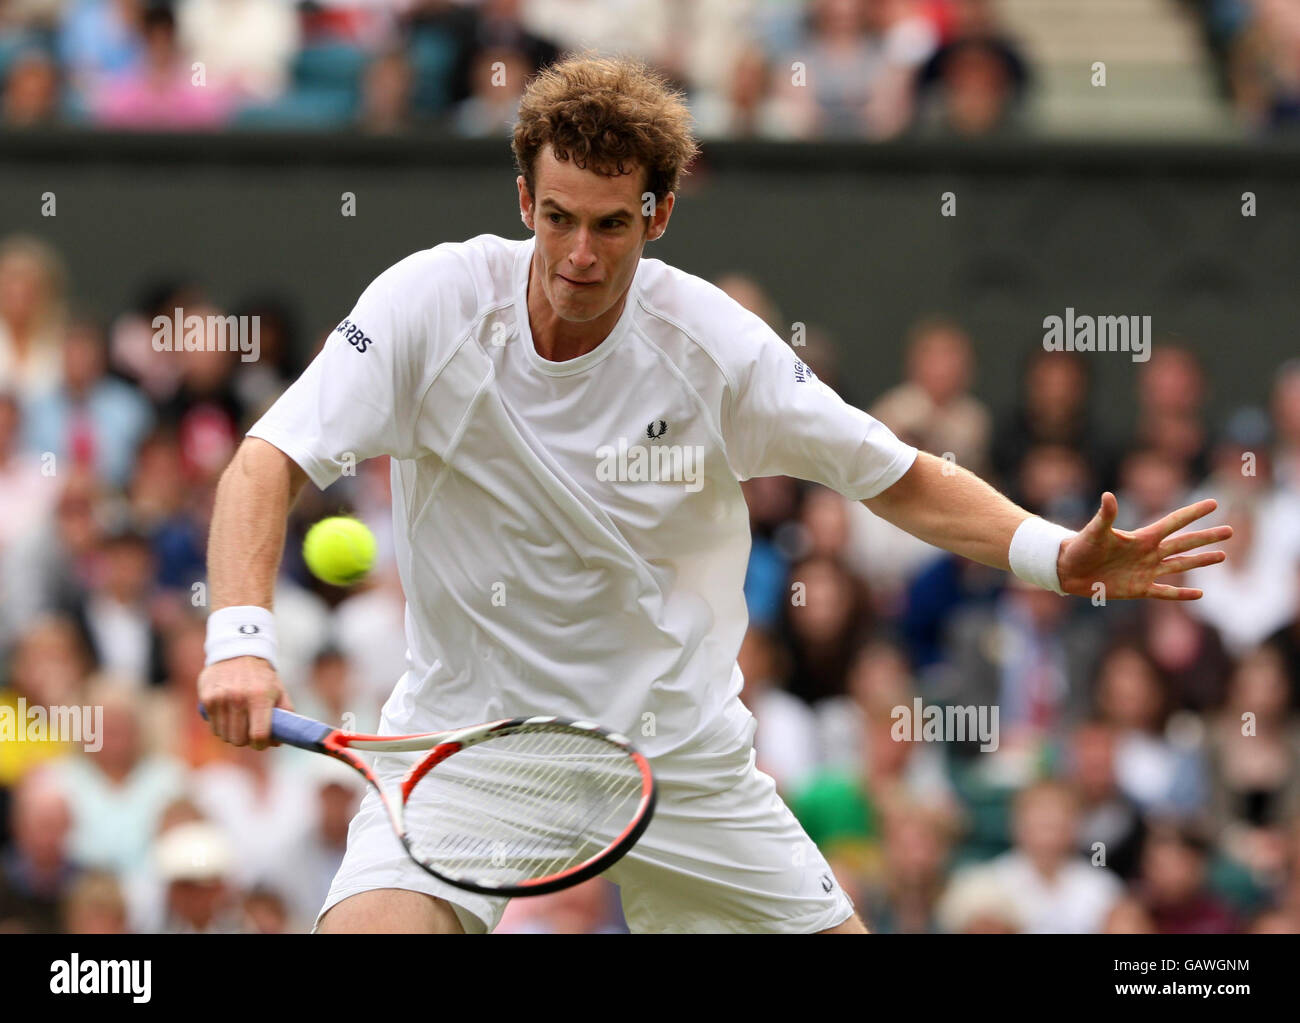 Tennis - Wimbledon Championships 2008 - Tag 2 - The All England Club. Andy Murray aus Großbritannien ist während der Wimbledon Championships 2008 im All England Tennis Club in Wimbledon in Aktion. Stockfoto